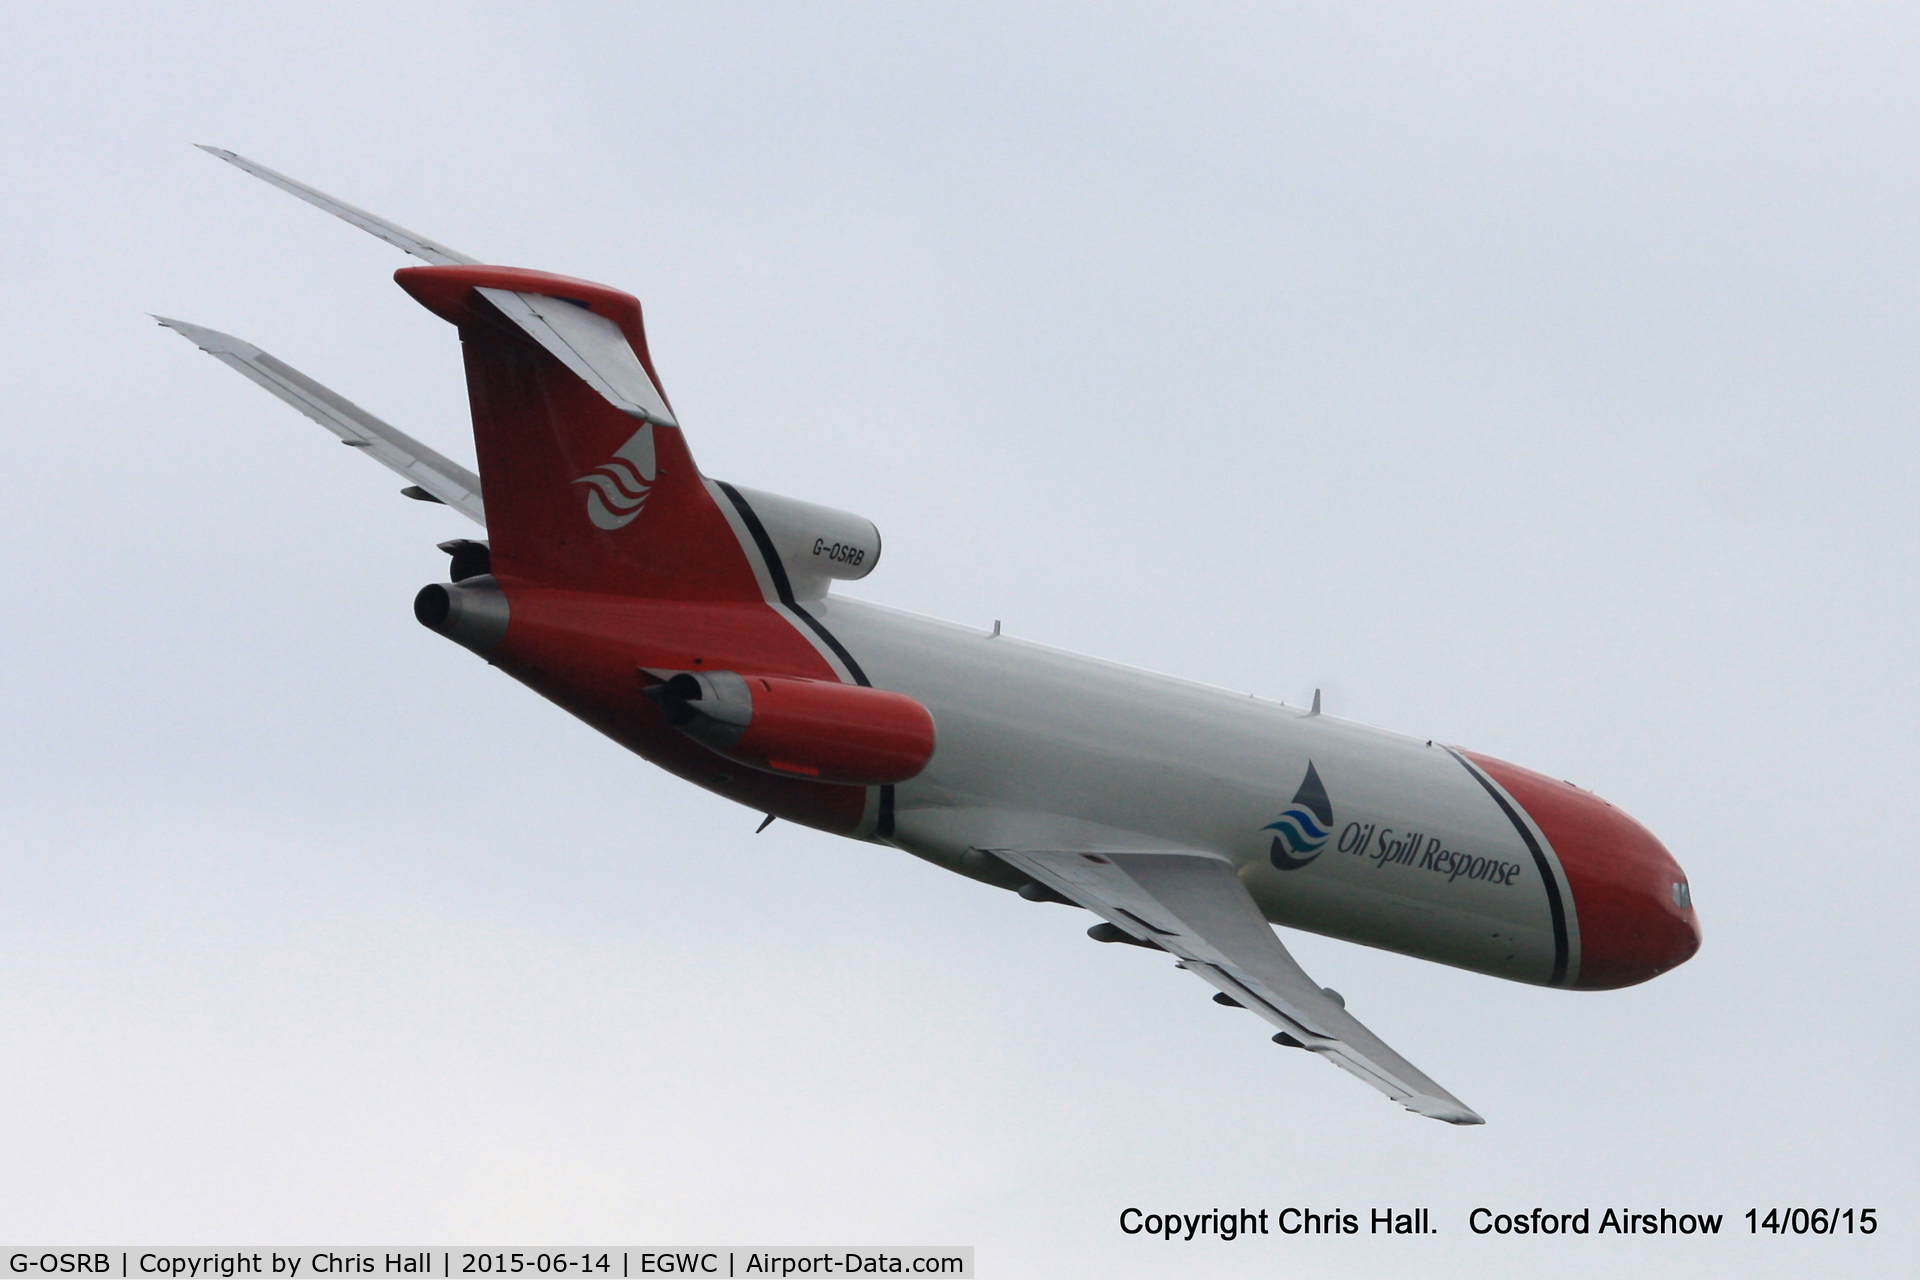 G-OSRB, 1983 Boeing 727-2S2F C/N 22929, displaying at the 2015 Cosford Airshow